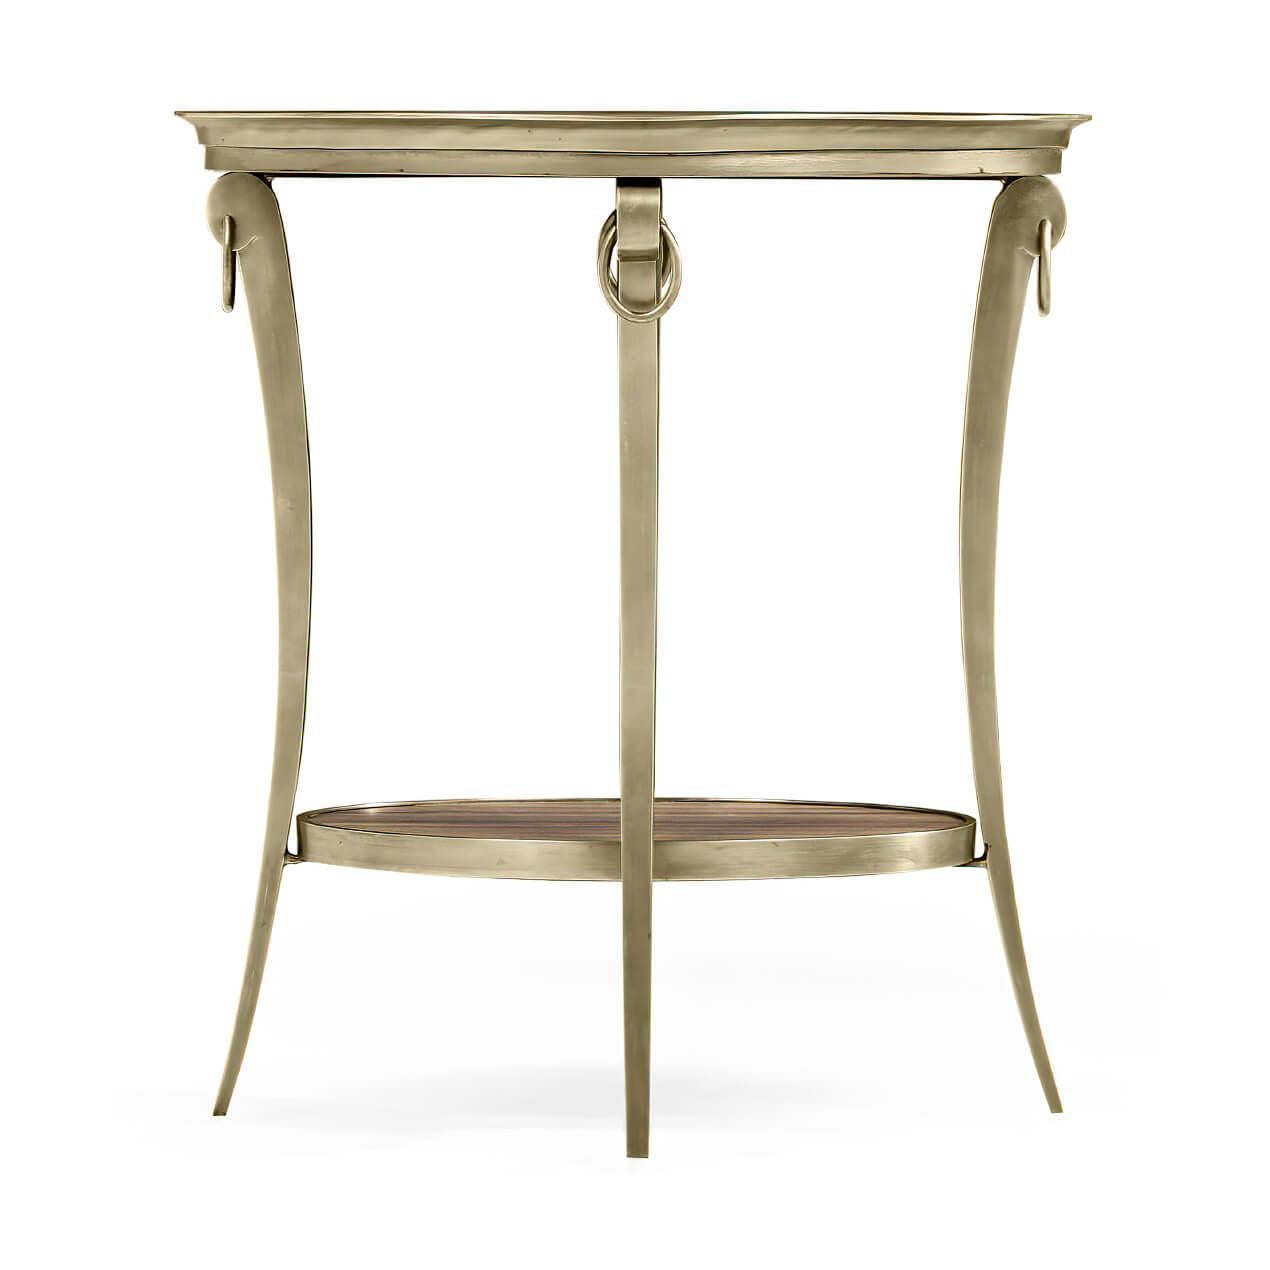 An Art Deco style two-tier oval side table with exotic Paldao veneer tops, brass gallery, and incurved supports with ring decorations.

Dimensions: 20